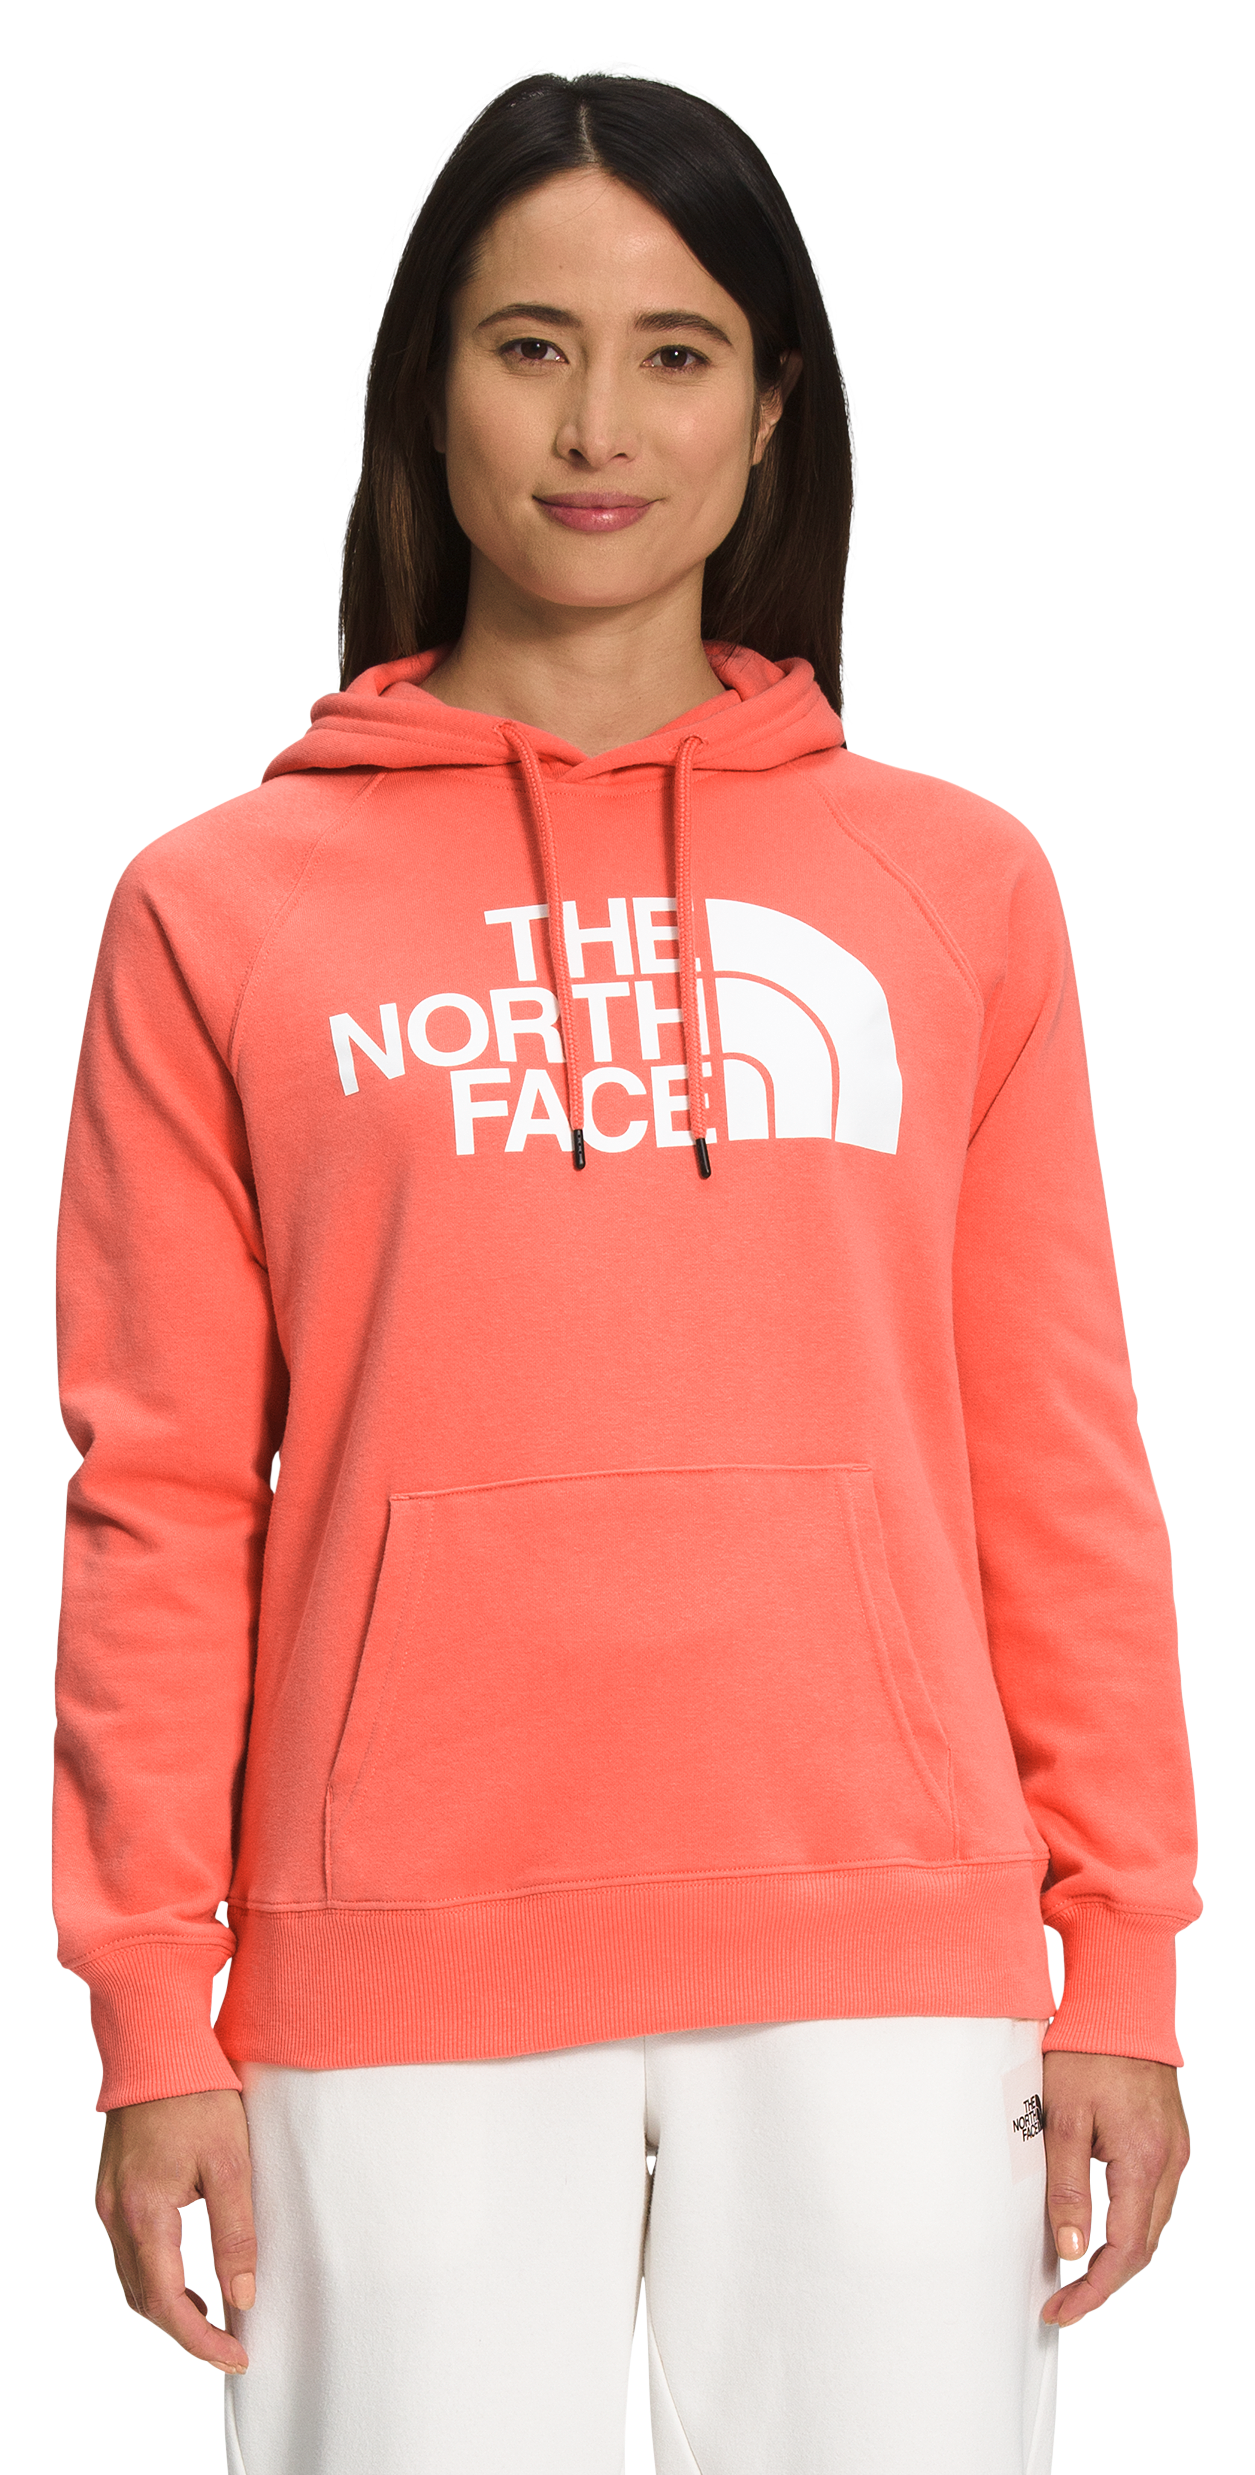 The North Face Half Dome Pullover Long-Sleeve Hoodie for Ladies - Coral Sunrise/TNF White - L